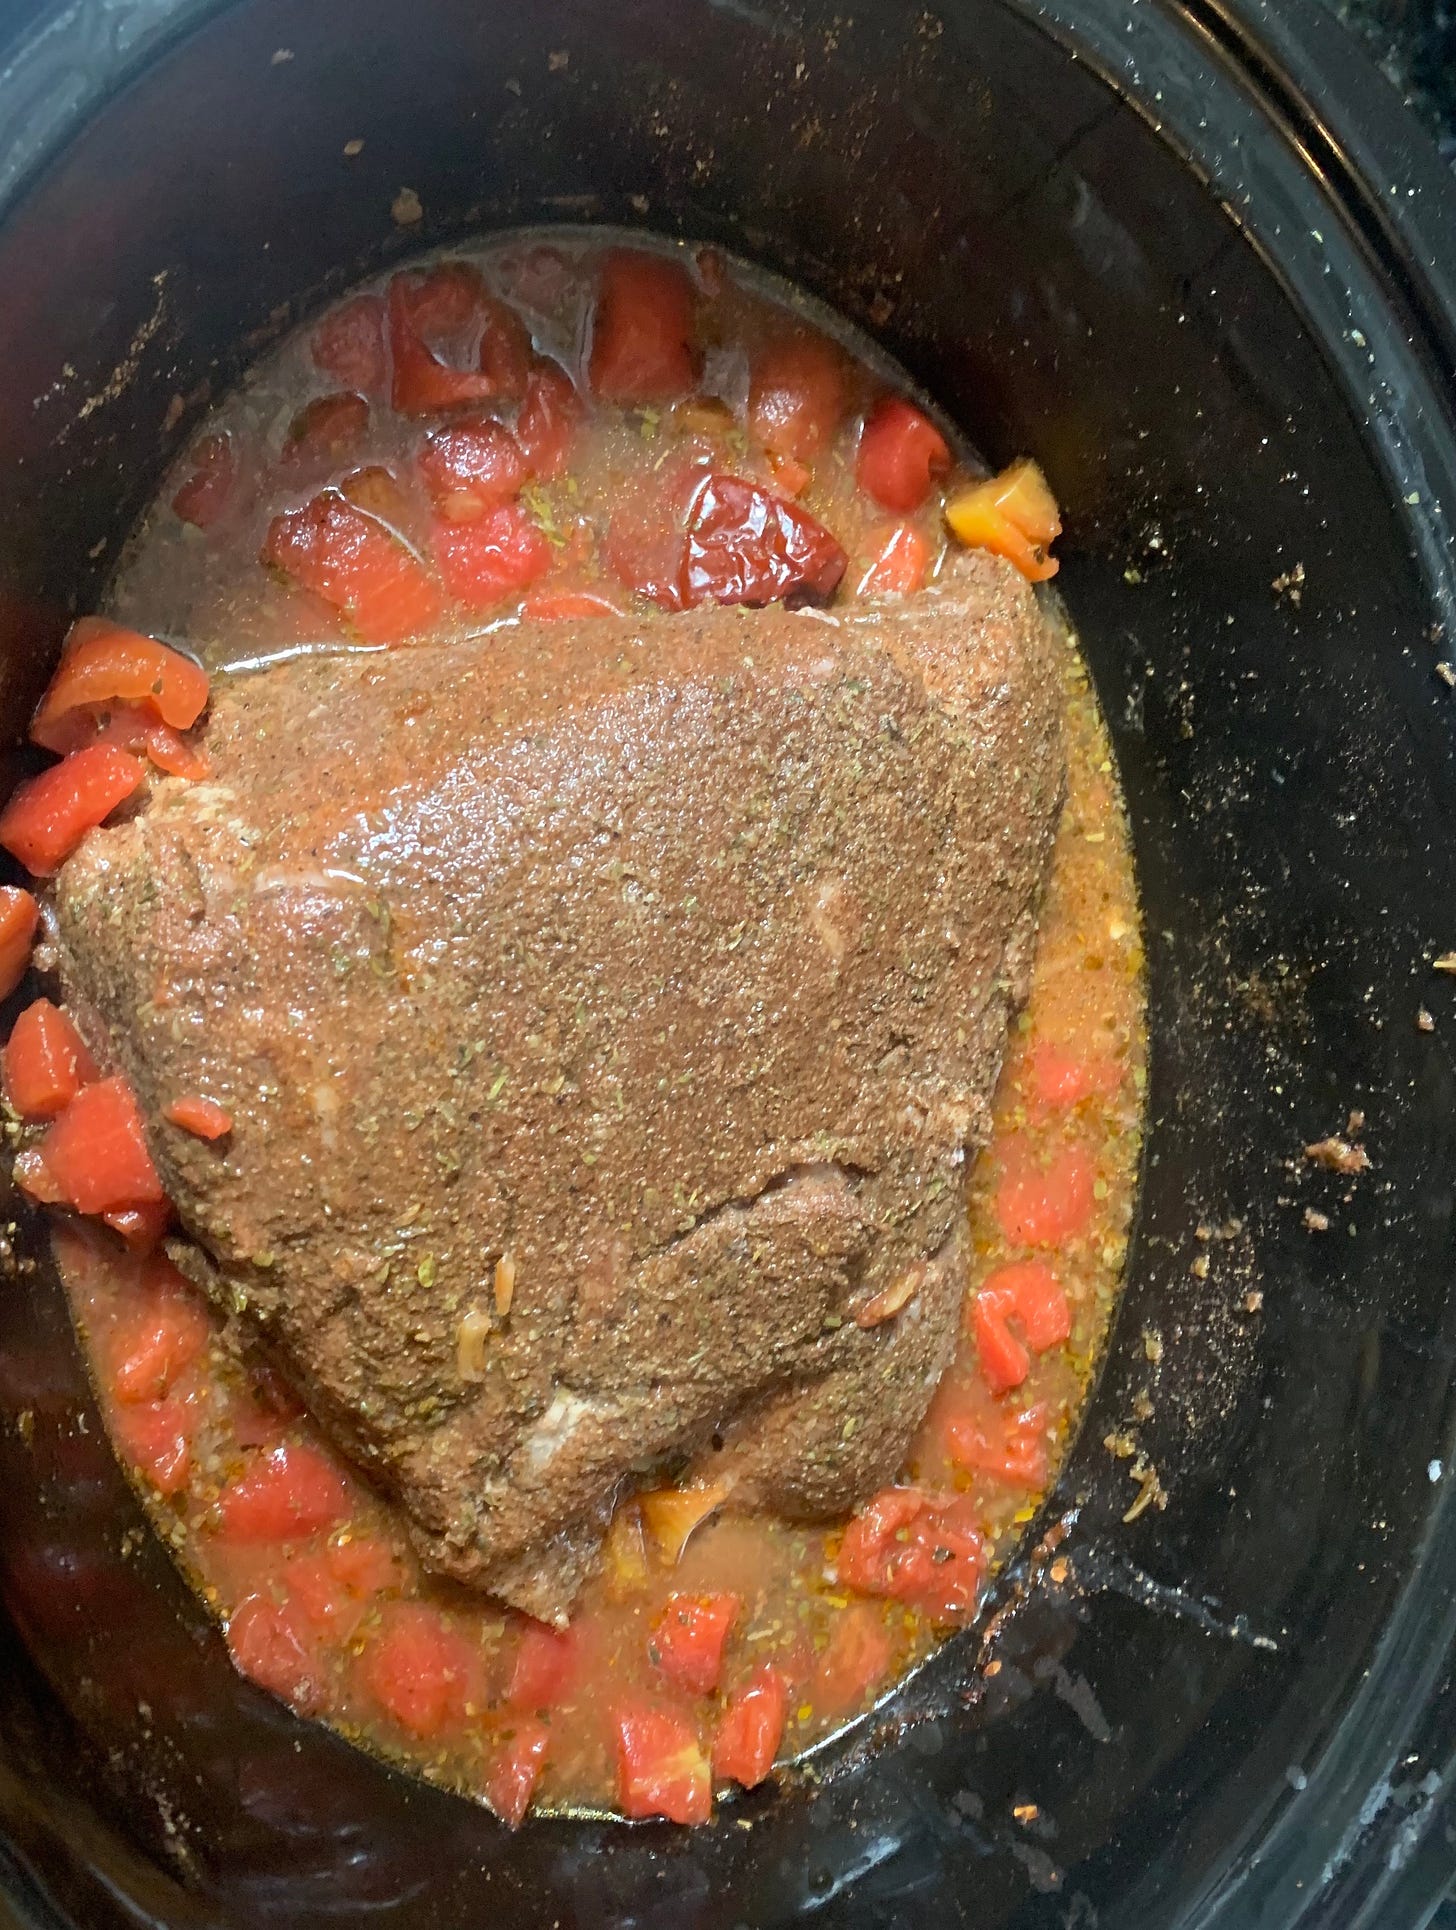 Pork shoulder in a slow cooker surrounded by tomatoes, chilis and liquid